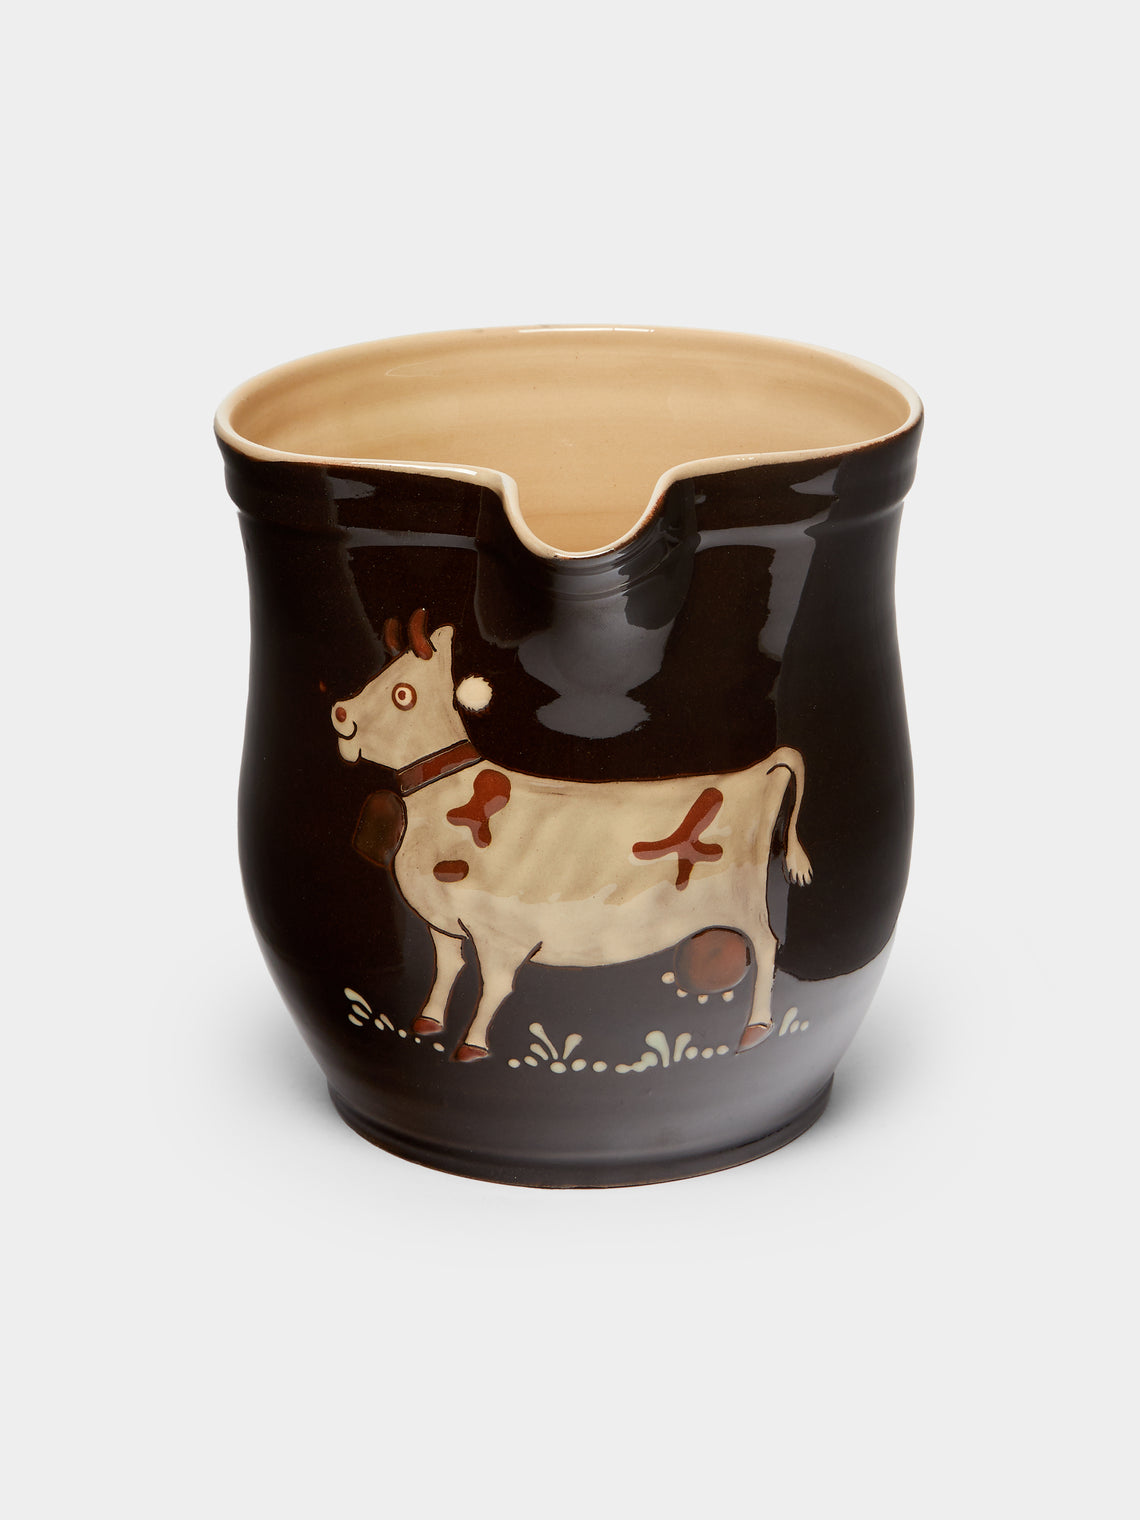 Poterie d’Évires - Cows Hand-Painted Ceramic Rounded Jug -  - ABASK